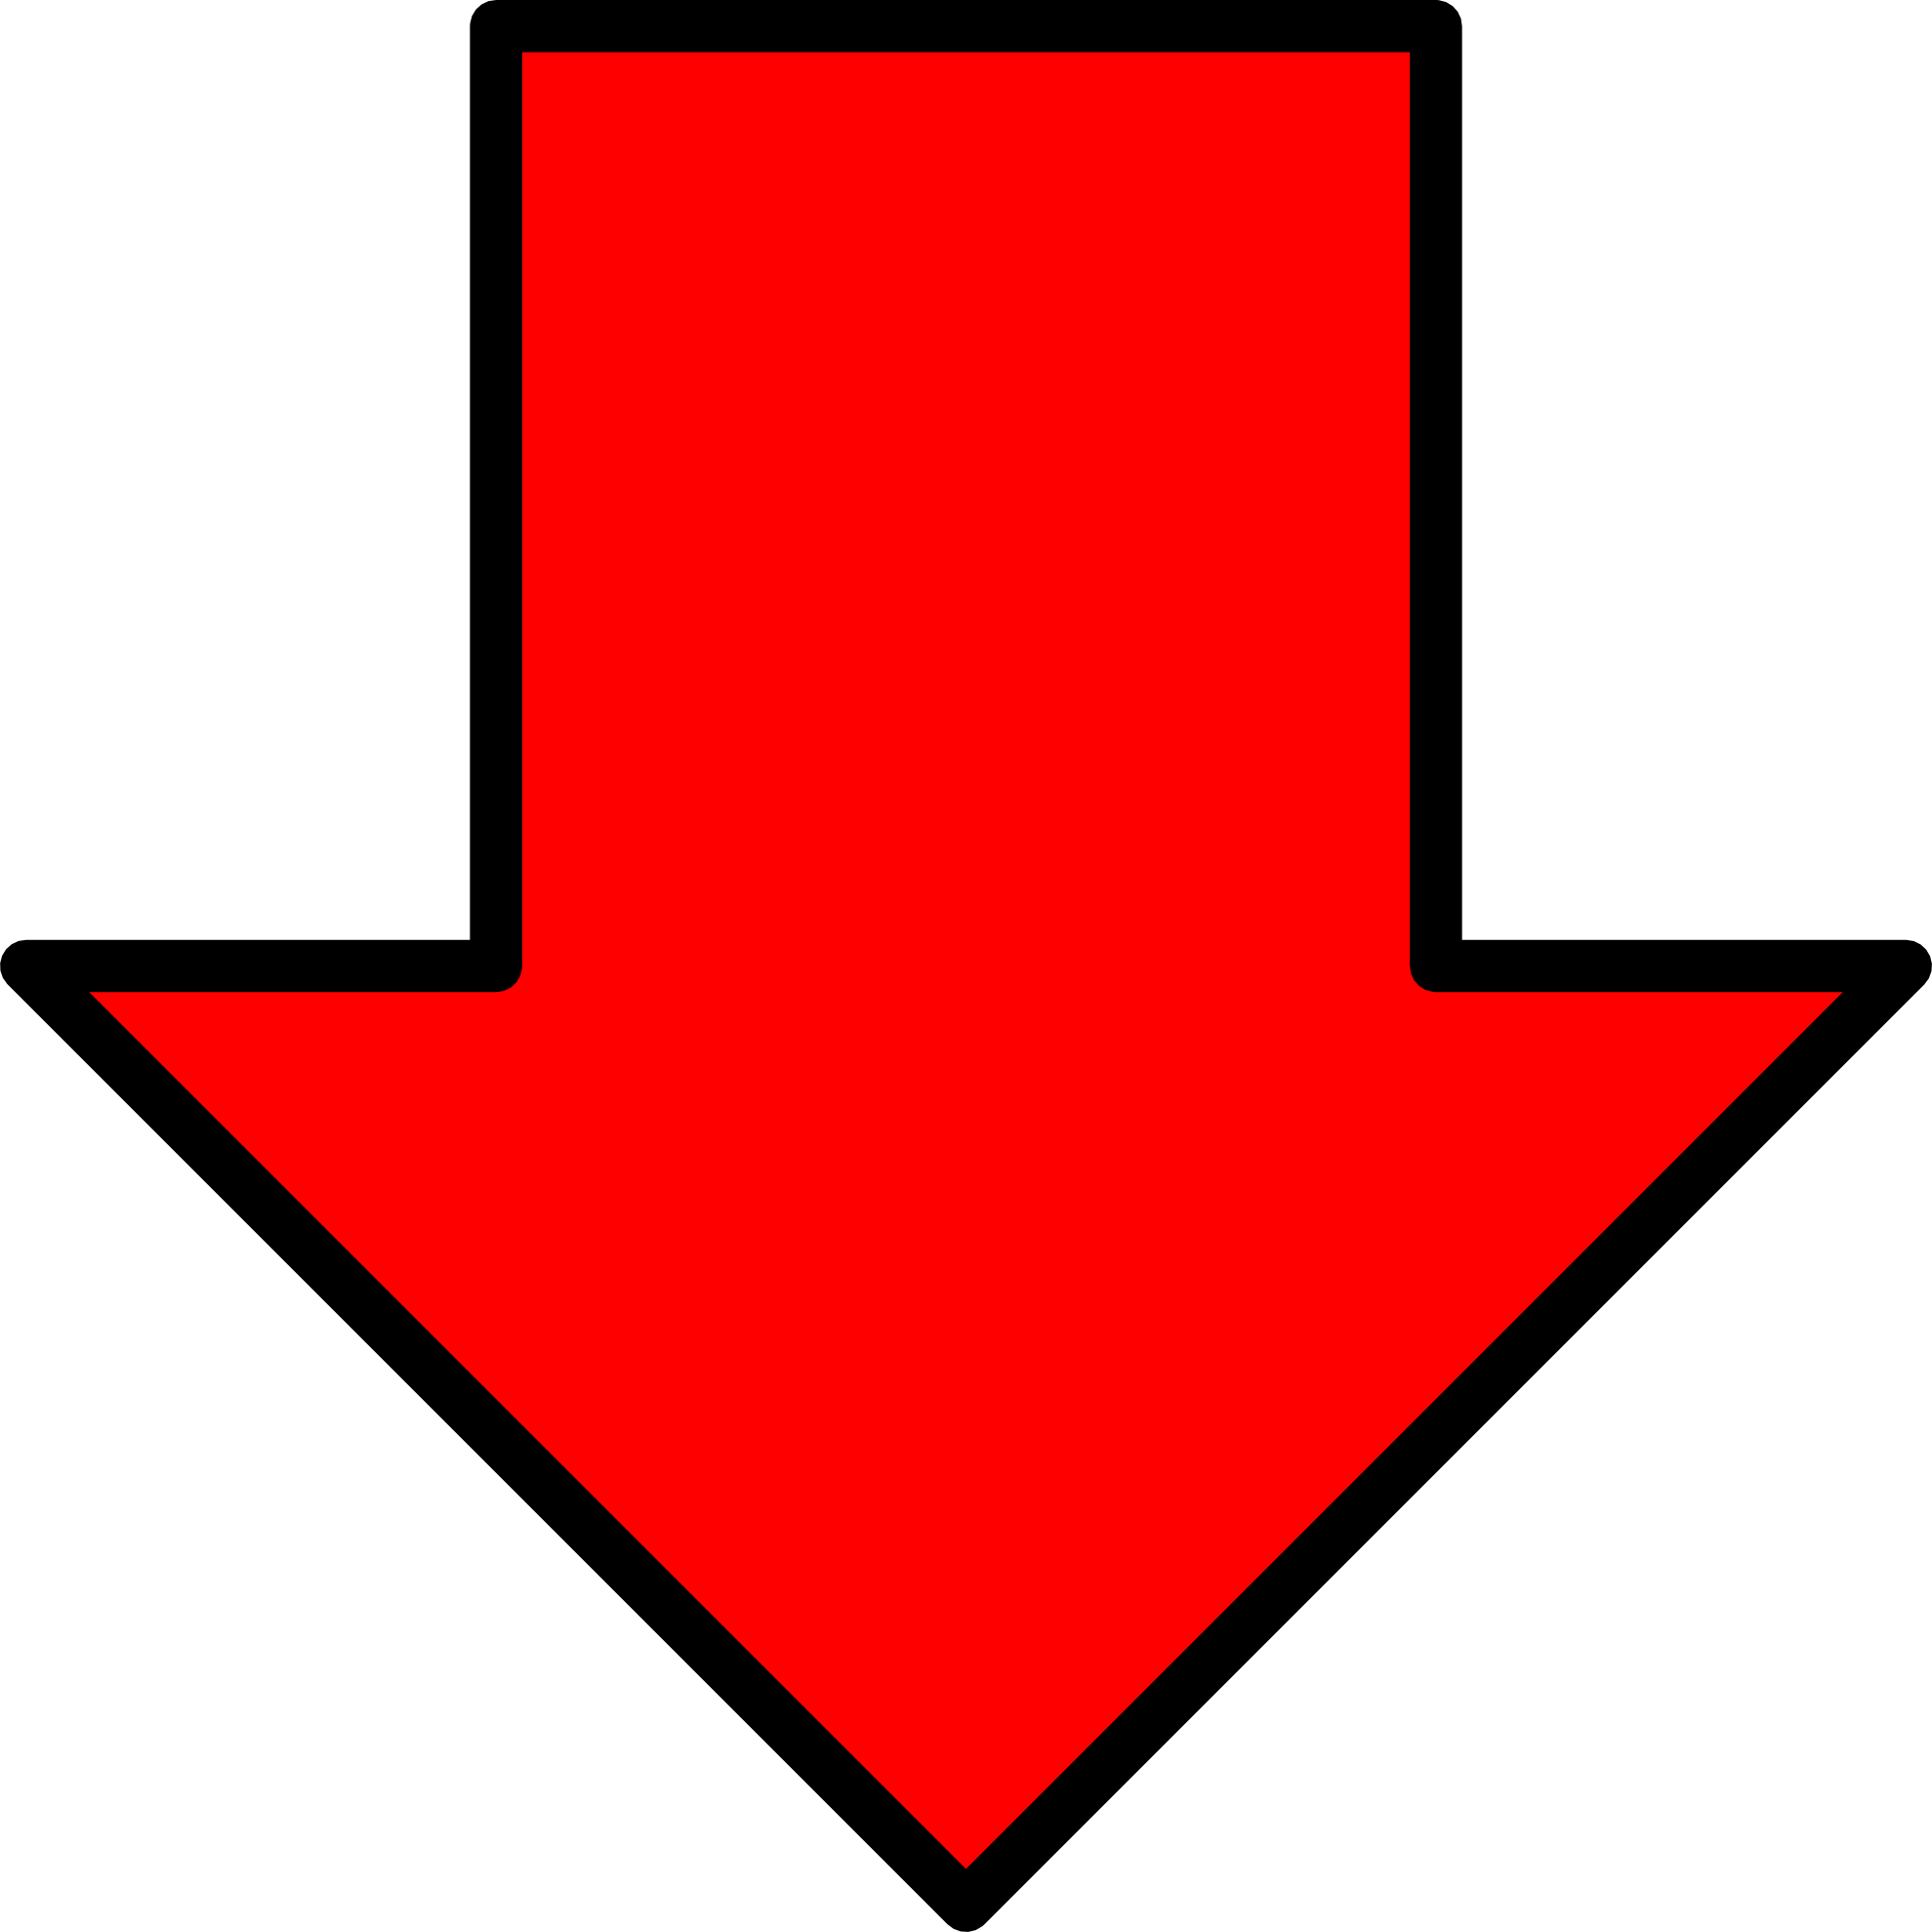 Red Right Arrow Png Images & Pictures - Becuo